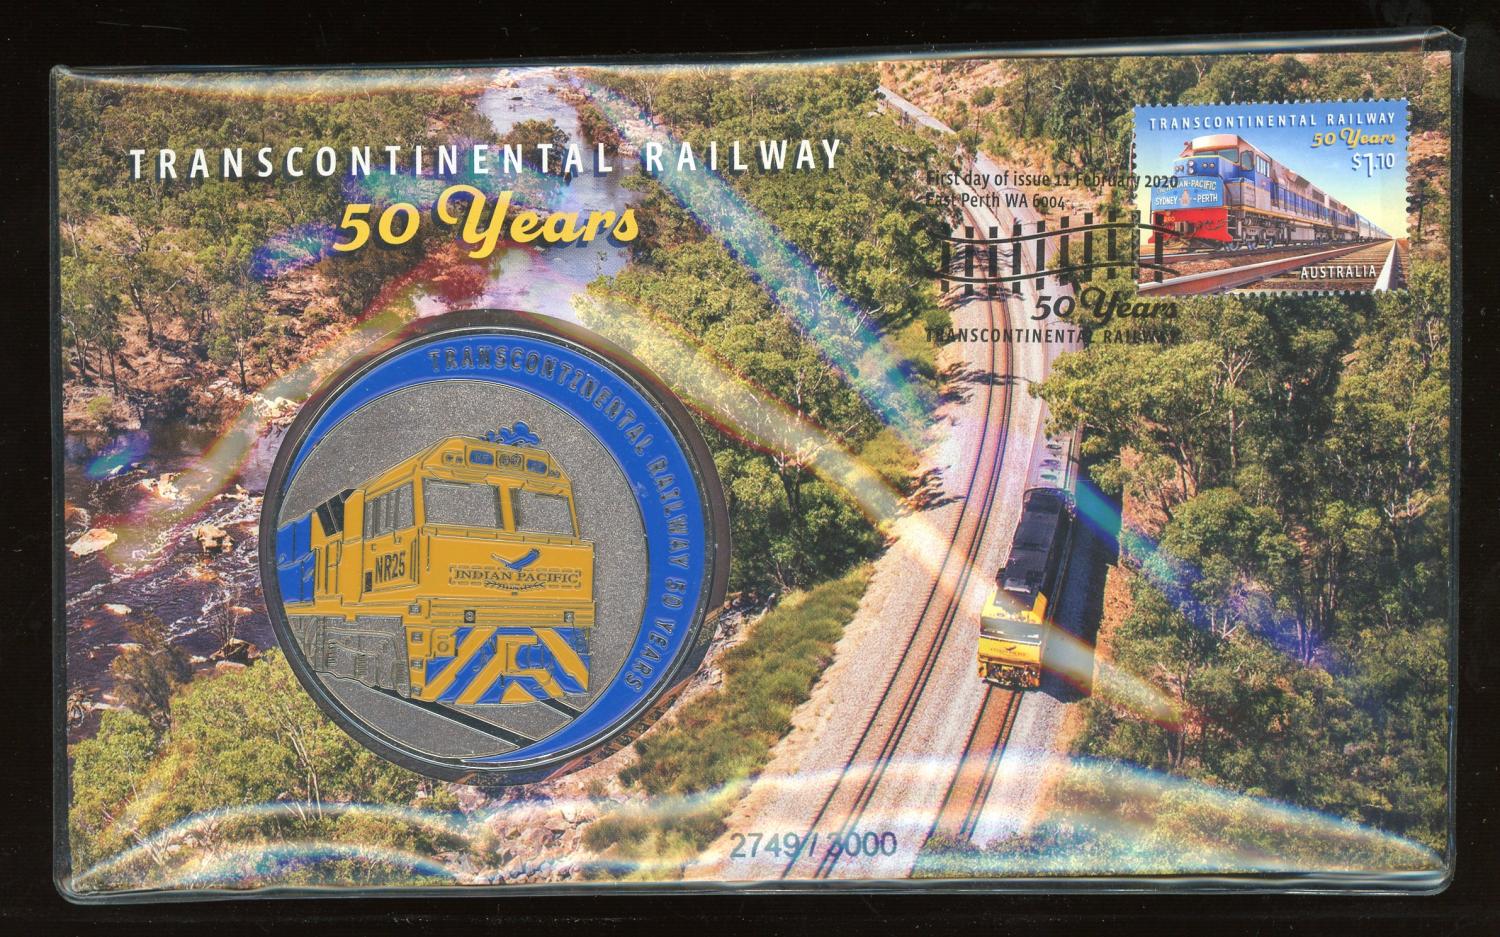 Thumbnail for 2020 Transcontinental Railway 50 Years Medallic PNC 2749 - 3000